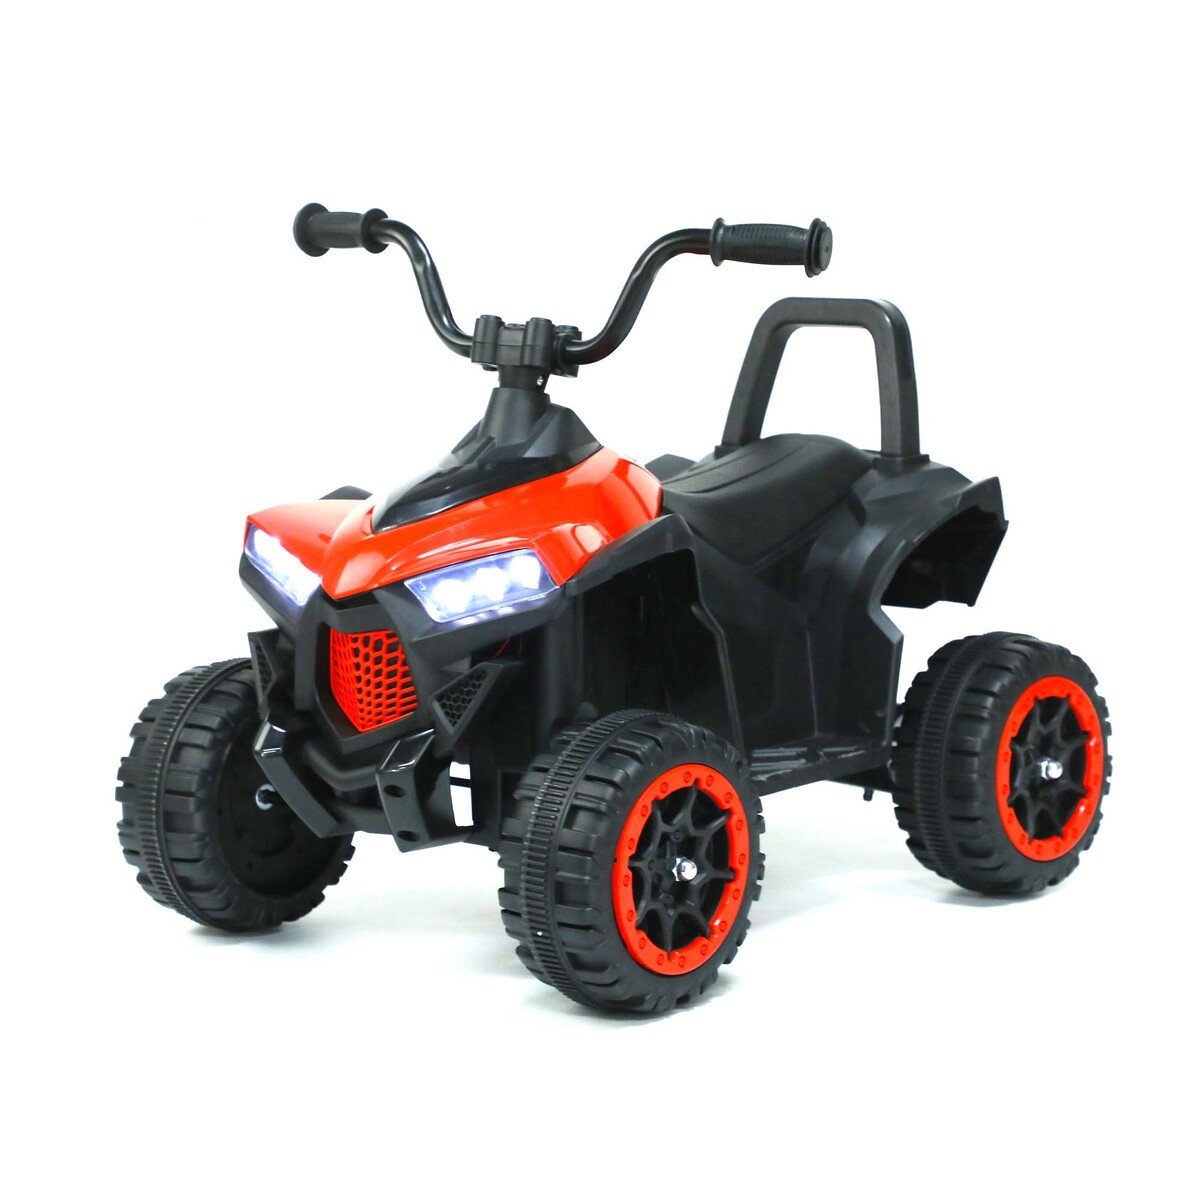 Skid Fusion Kids Battery Operated Kids Motor Quad Bike 8110 Red